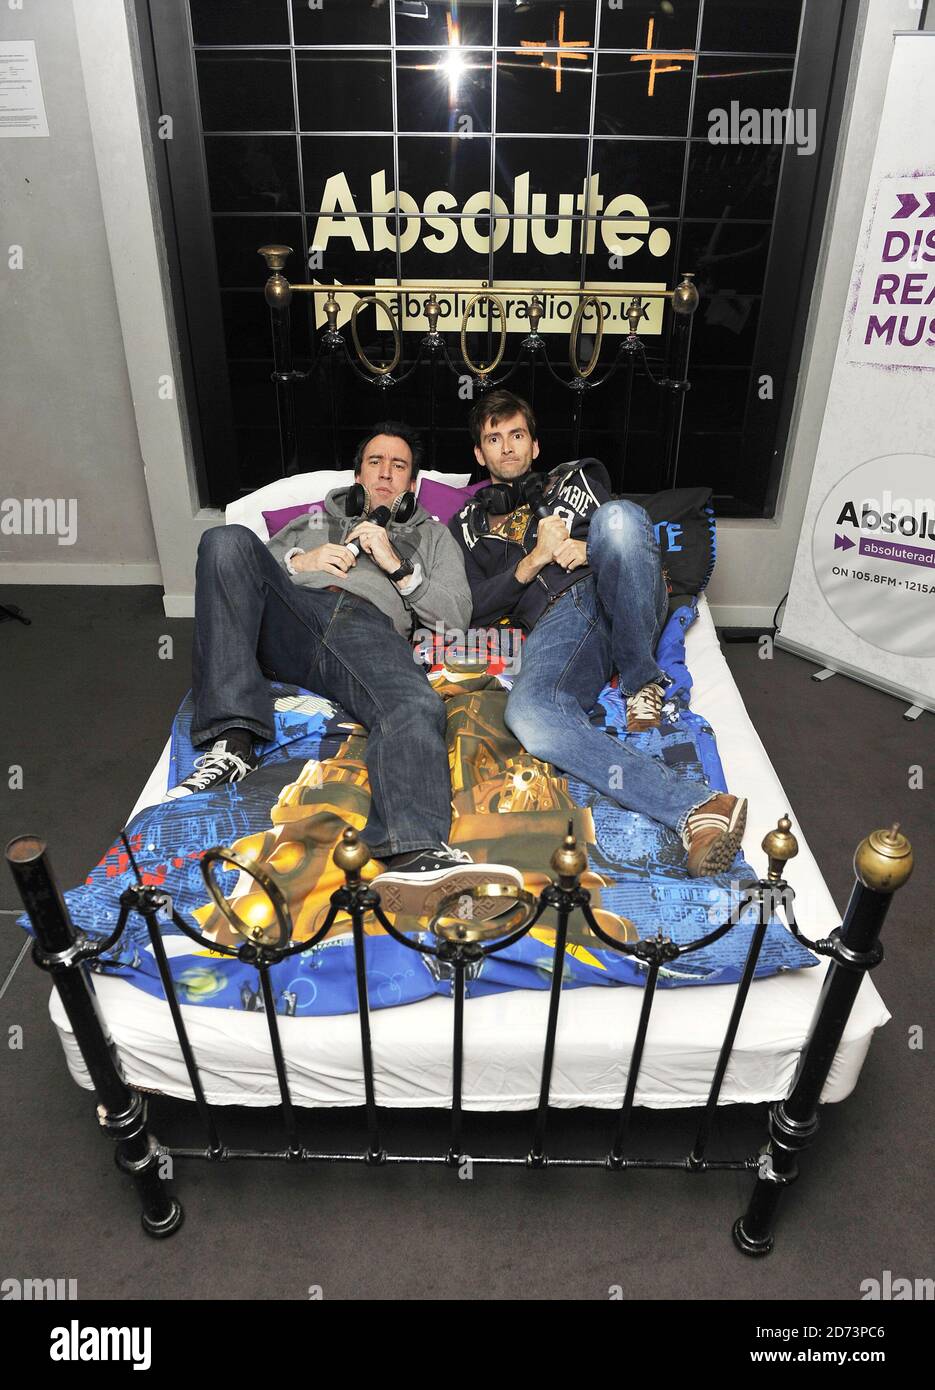 David Tennant and Christian O'Connell broadcast from David Tennant's bed during O'Connell's breakfast show. The bed will be auctioned tomorrow with proceeds going to Children in Need. Stock Photo